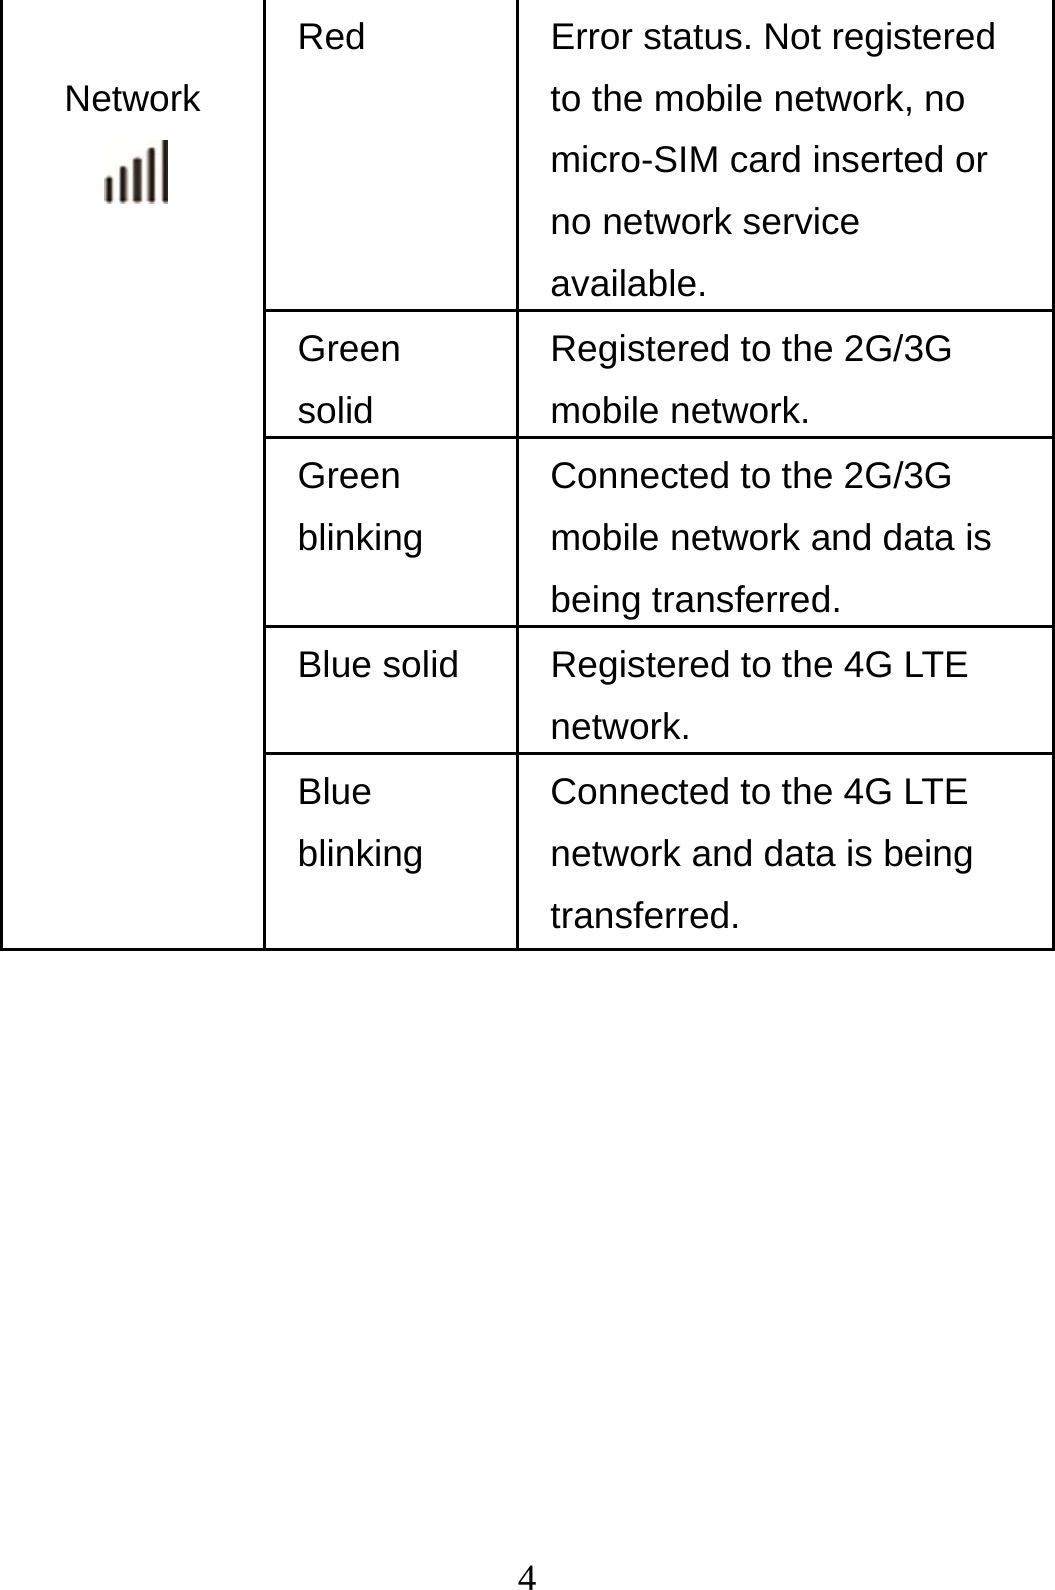 4               Network  Red  Error status. Not registered to the mobile network, no micro-SIM card inserted or no network service available.  Green solid Registered to the 2G/3G mobile network. Green blinking Connected to the 2G/3G mobile network and data is being transferred. Blue solid  Registered to the 4G LTE network. Blue blinking Connected to the 4G LTE network and data is being transferred.          